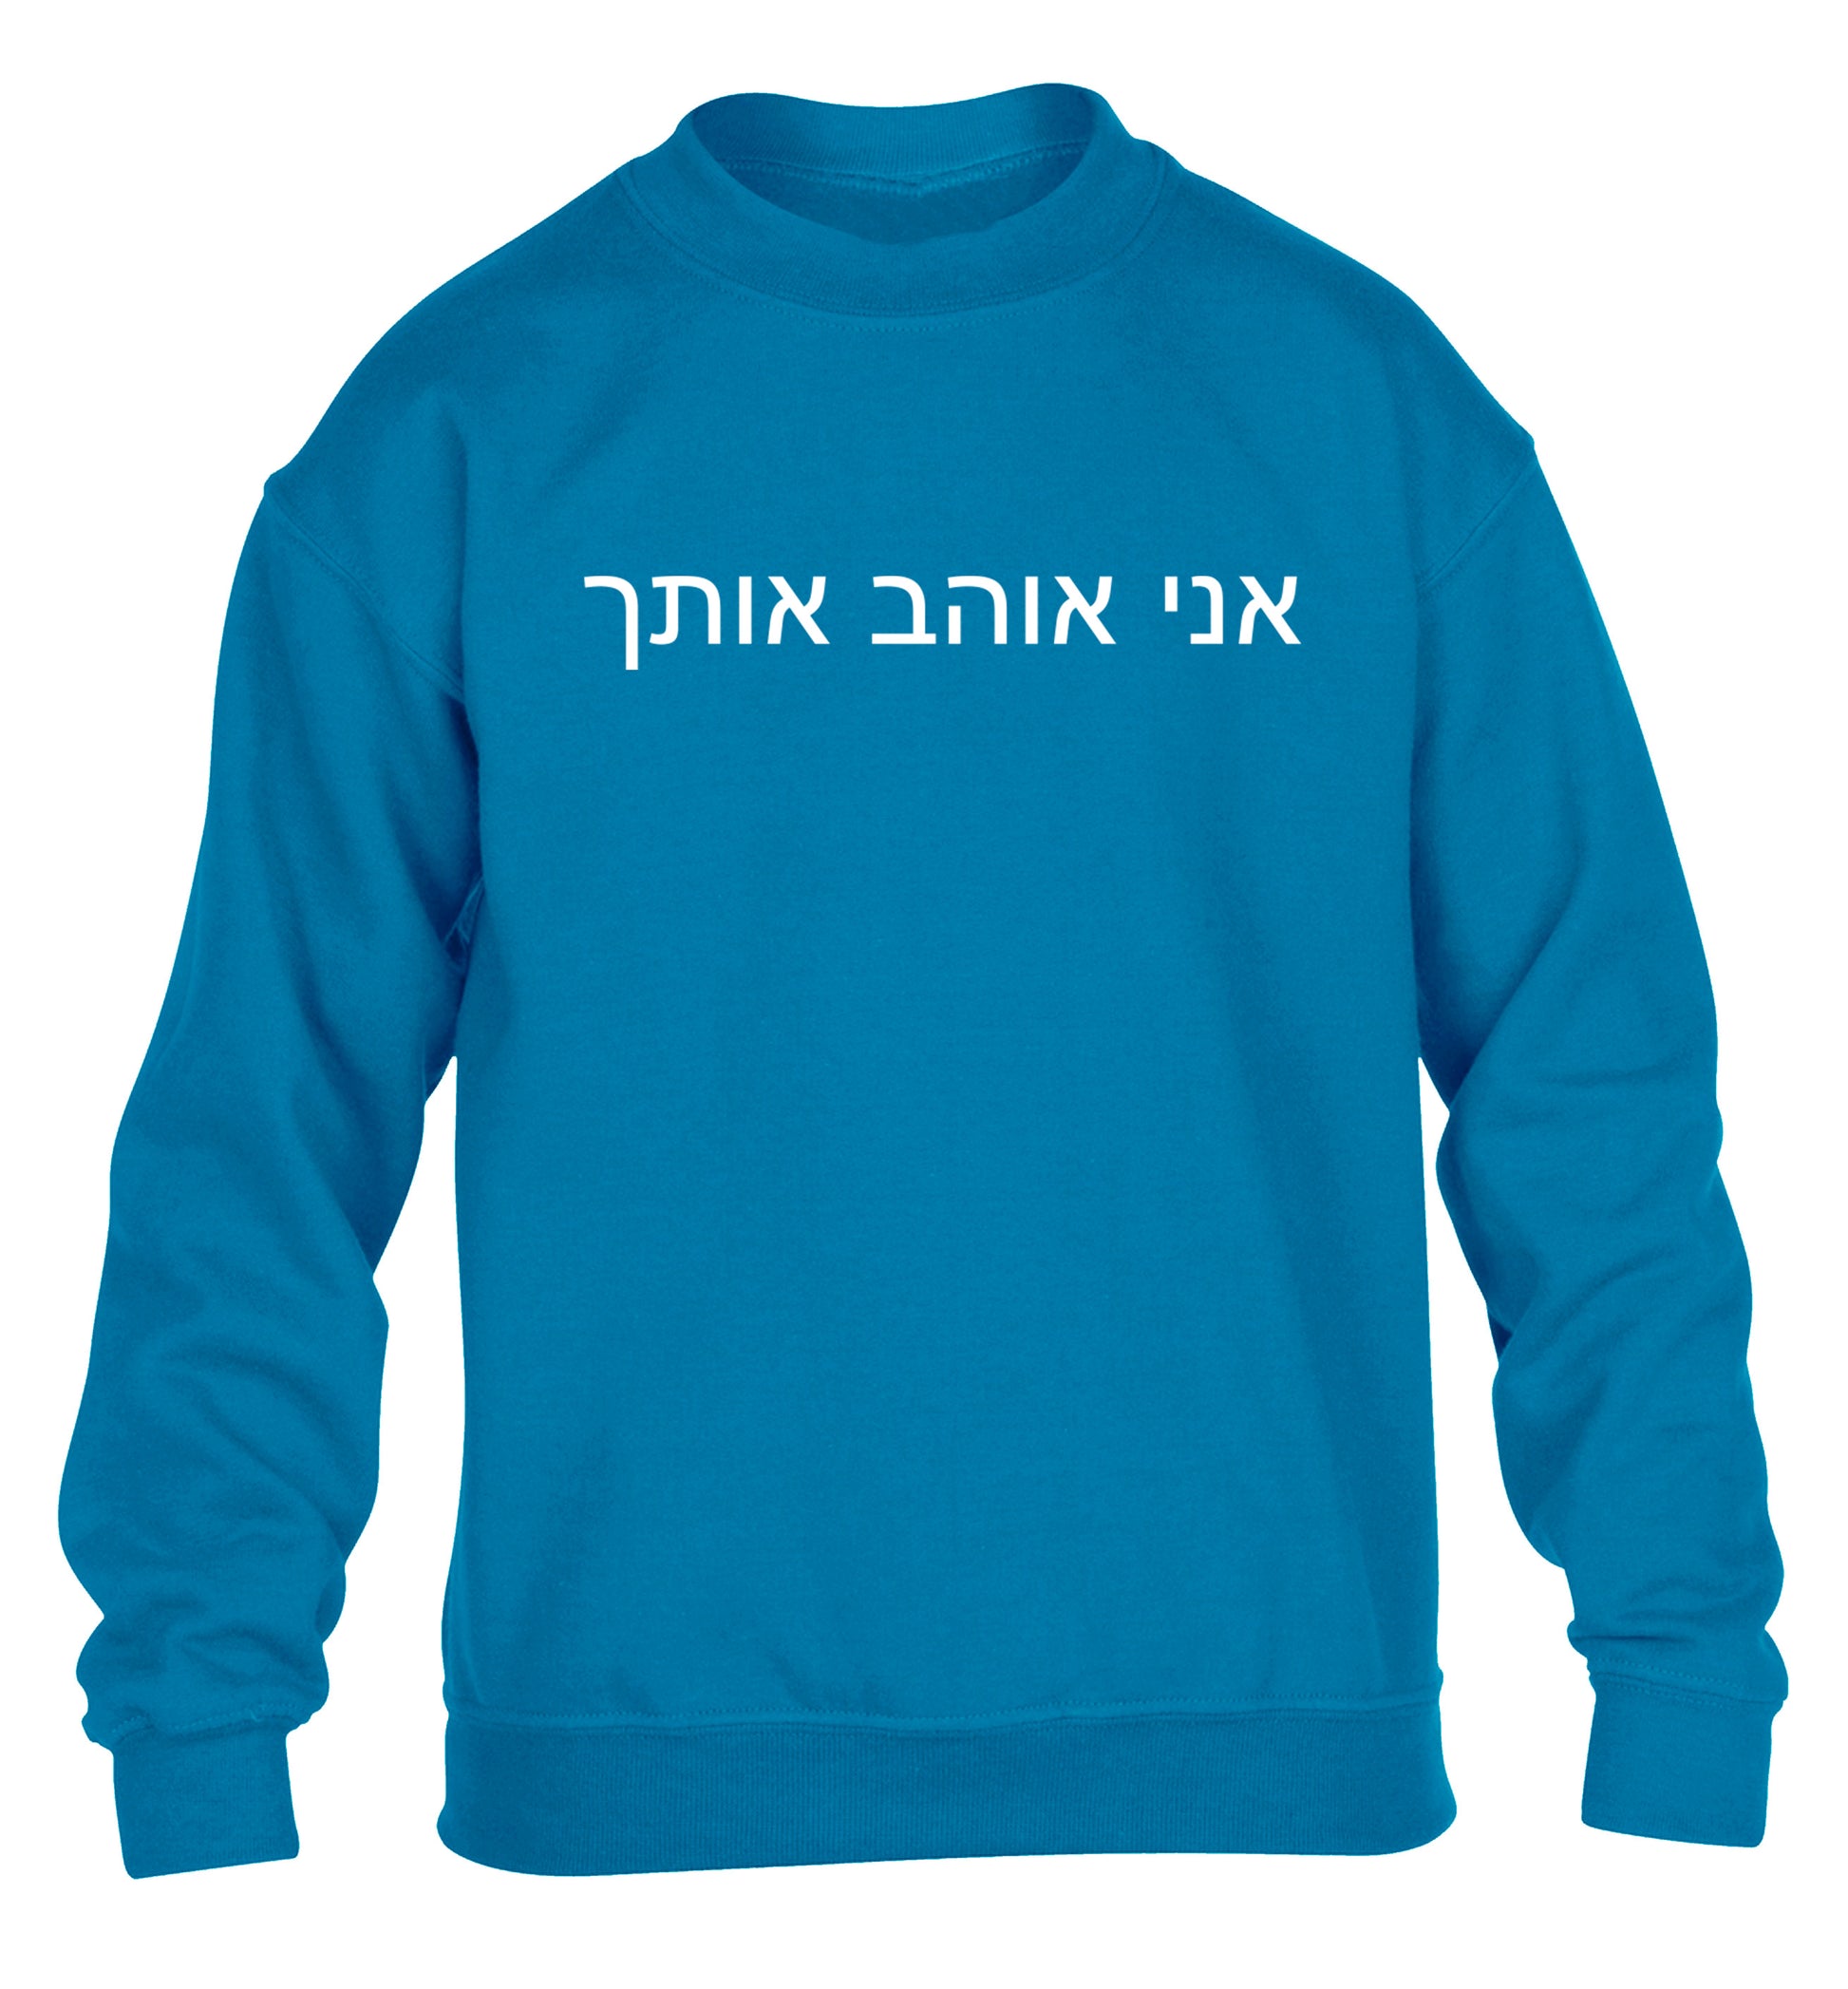 ___ ____ ____ - I love you children's blue sweater 12-13 Years